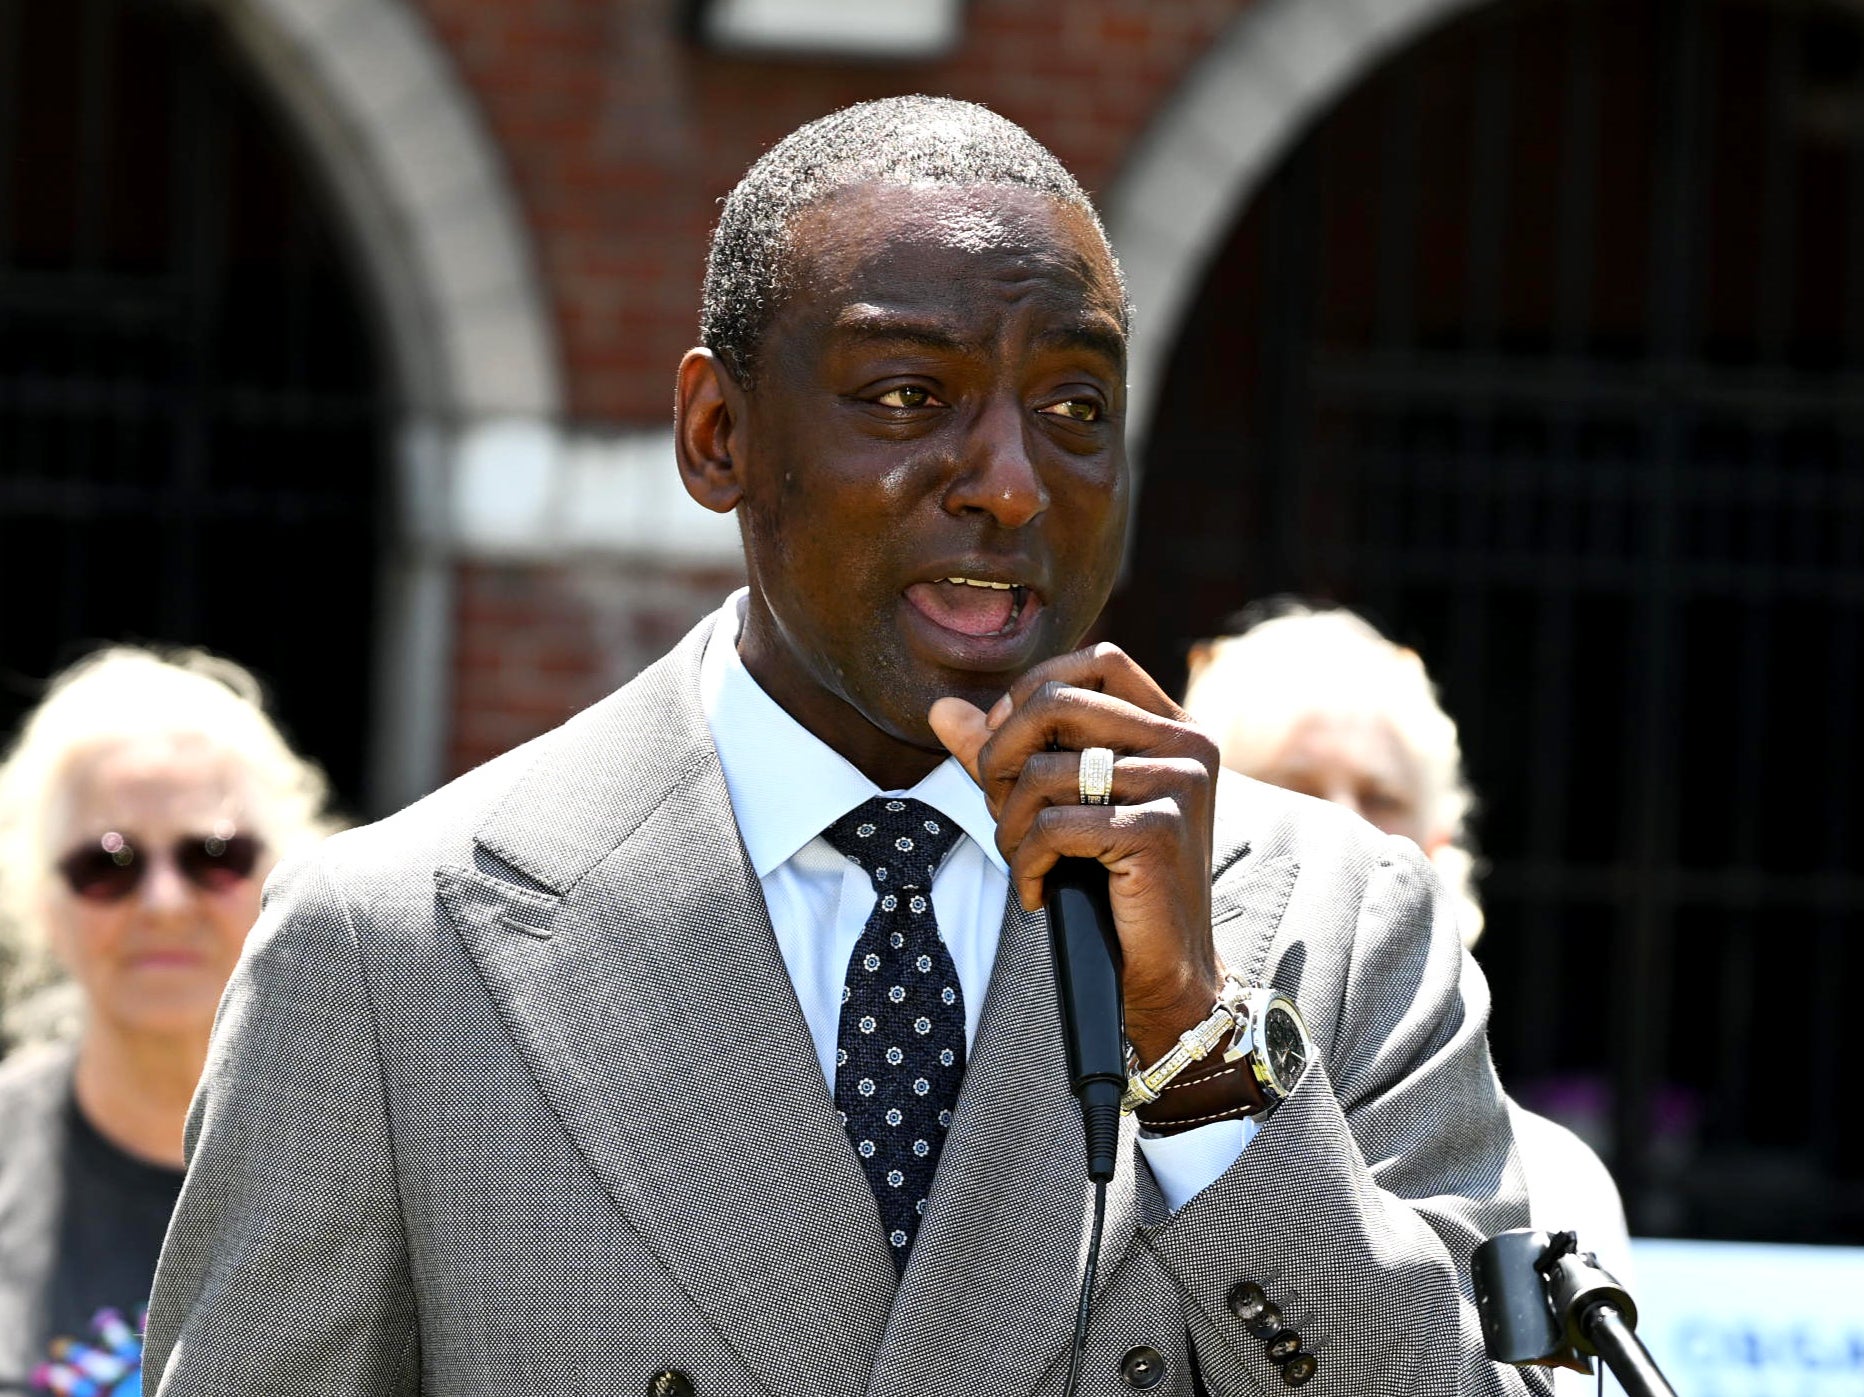 Last year, one of the Central Park Five, Yusef Salaam, successfully ran for a seat on the New York City Council, representing Central Harlem